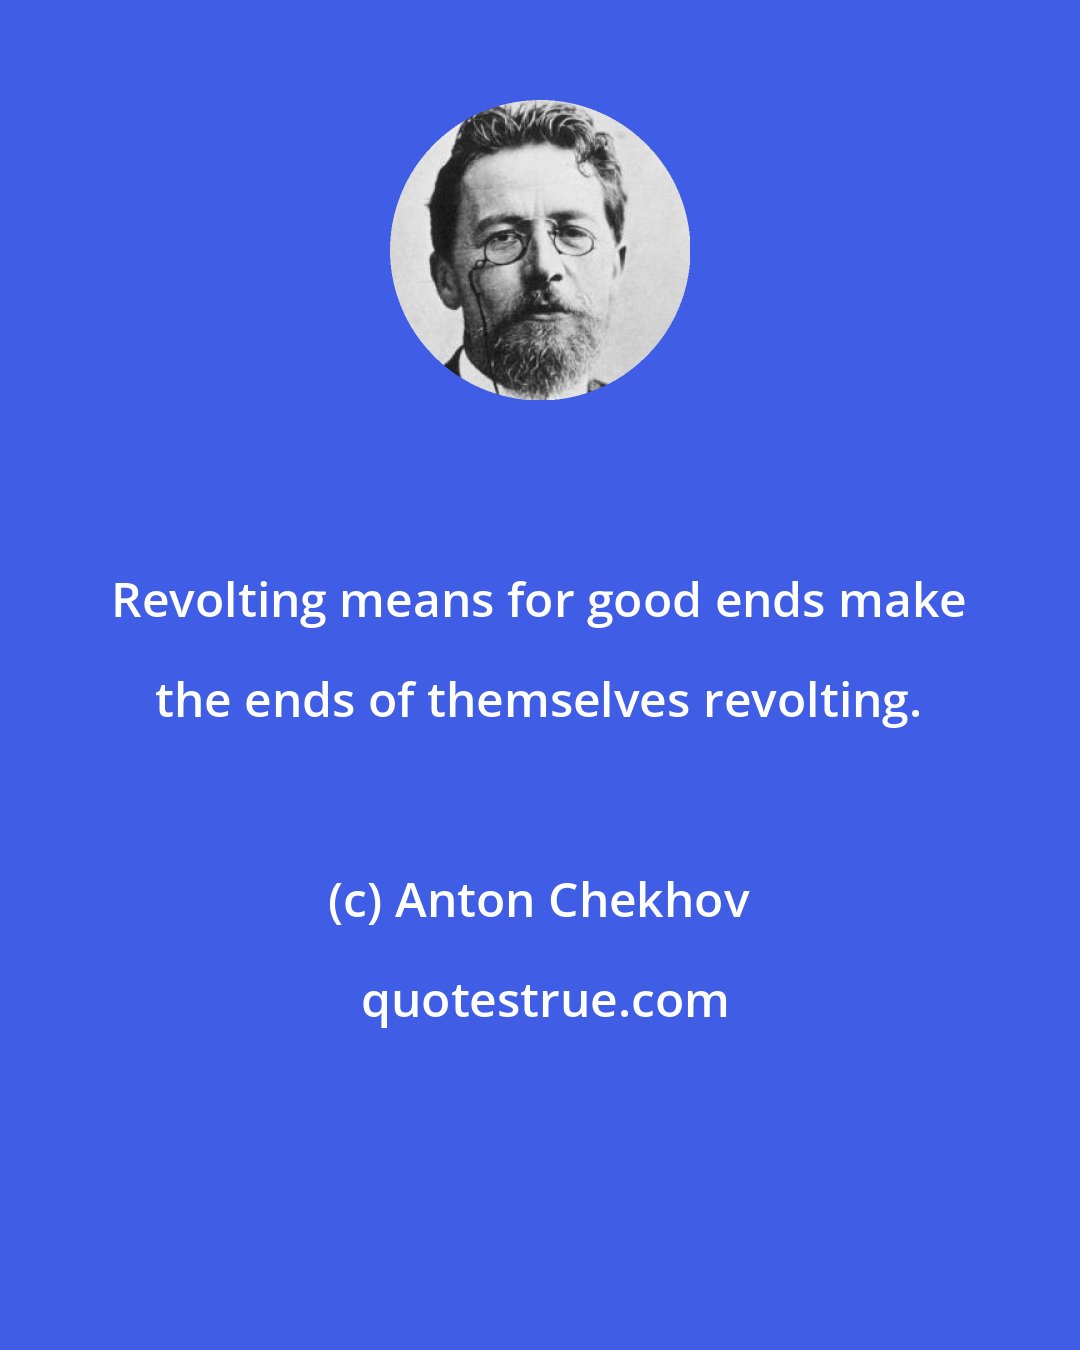 Anton Chekhov: Revolting means for good ends make the ends of themselves revolting.